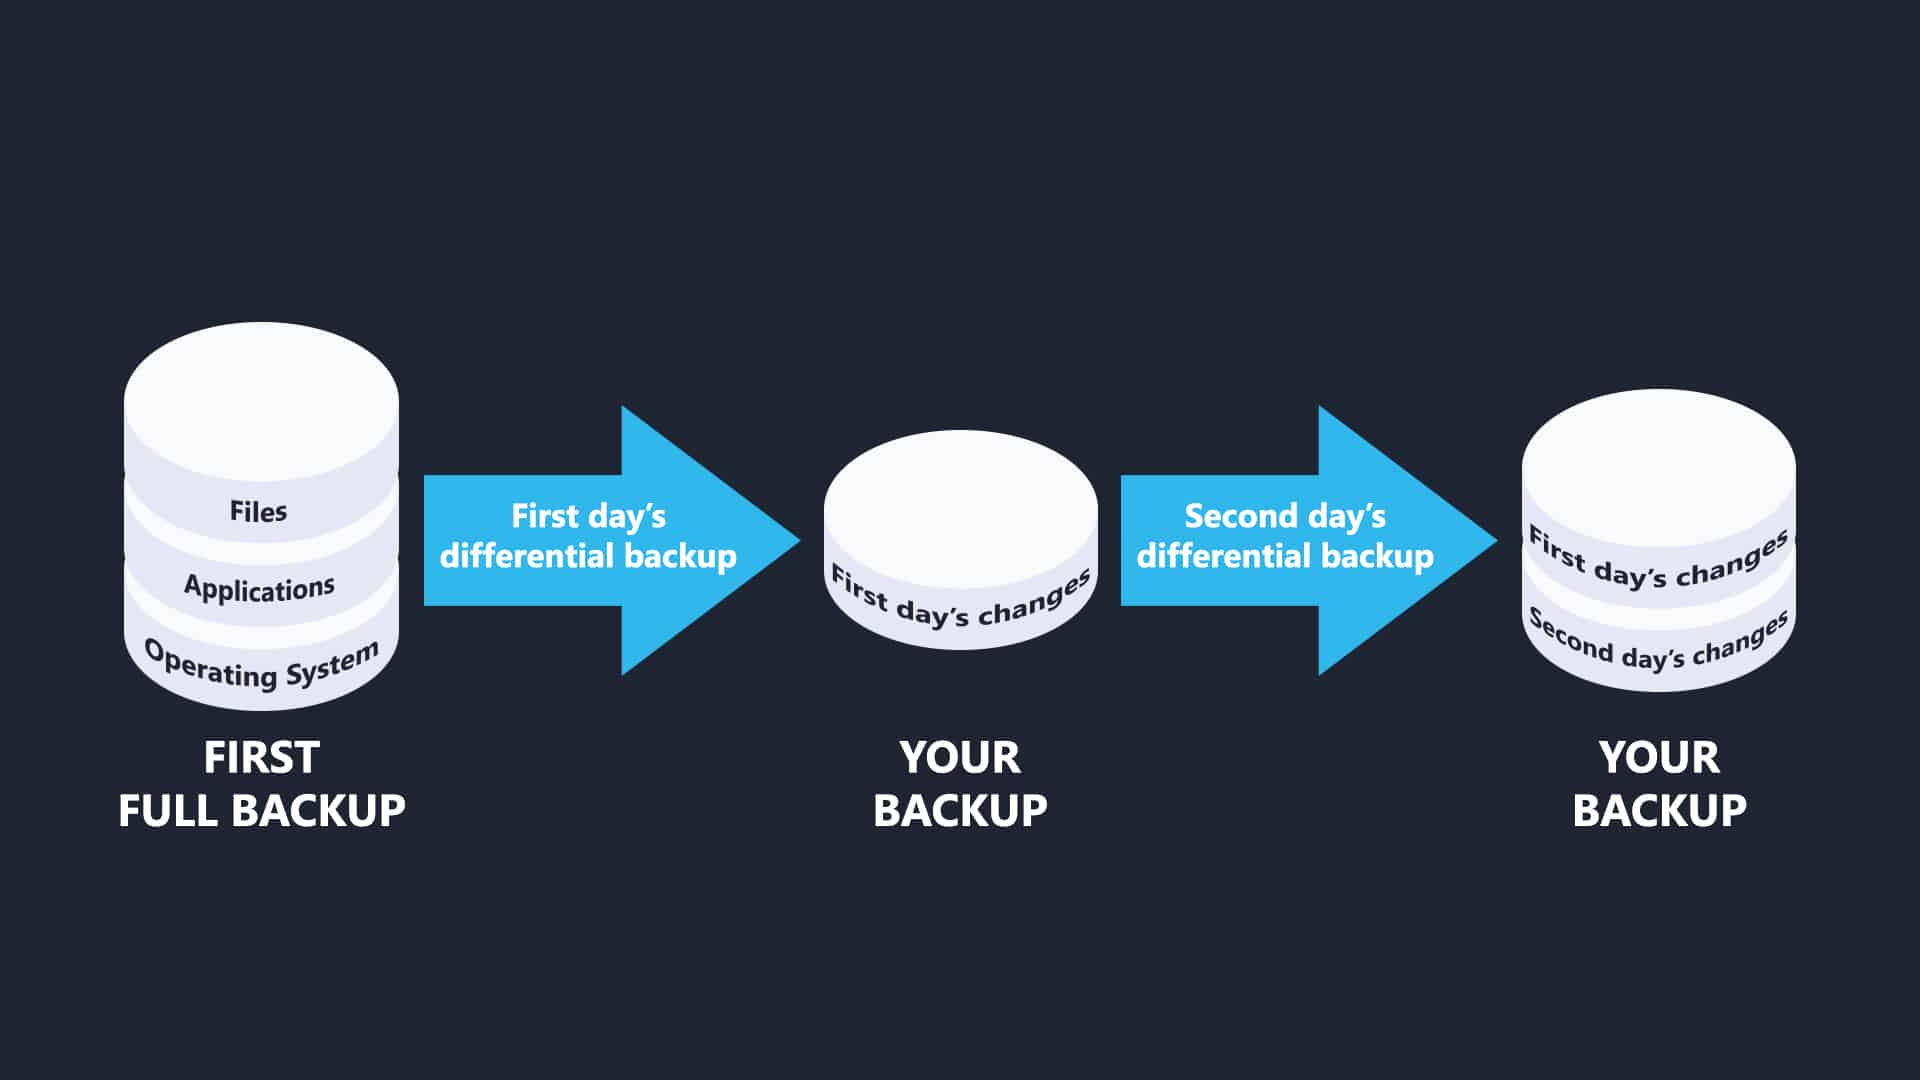 Image showing the progression of differential backups, starting with a full backup